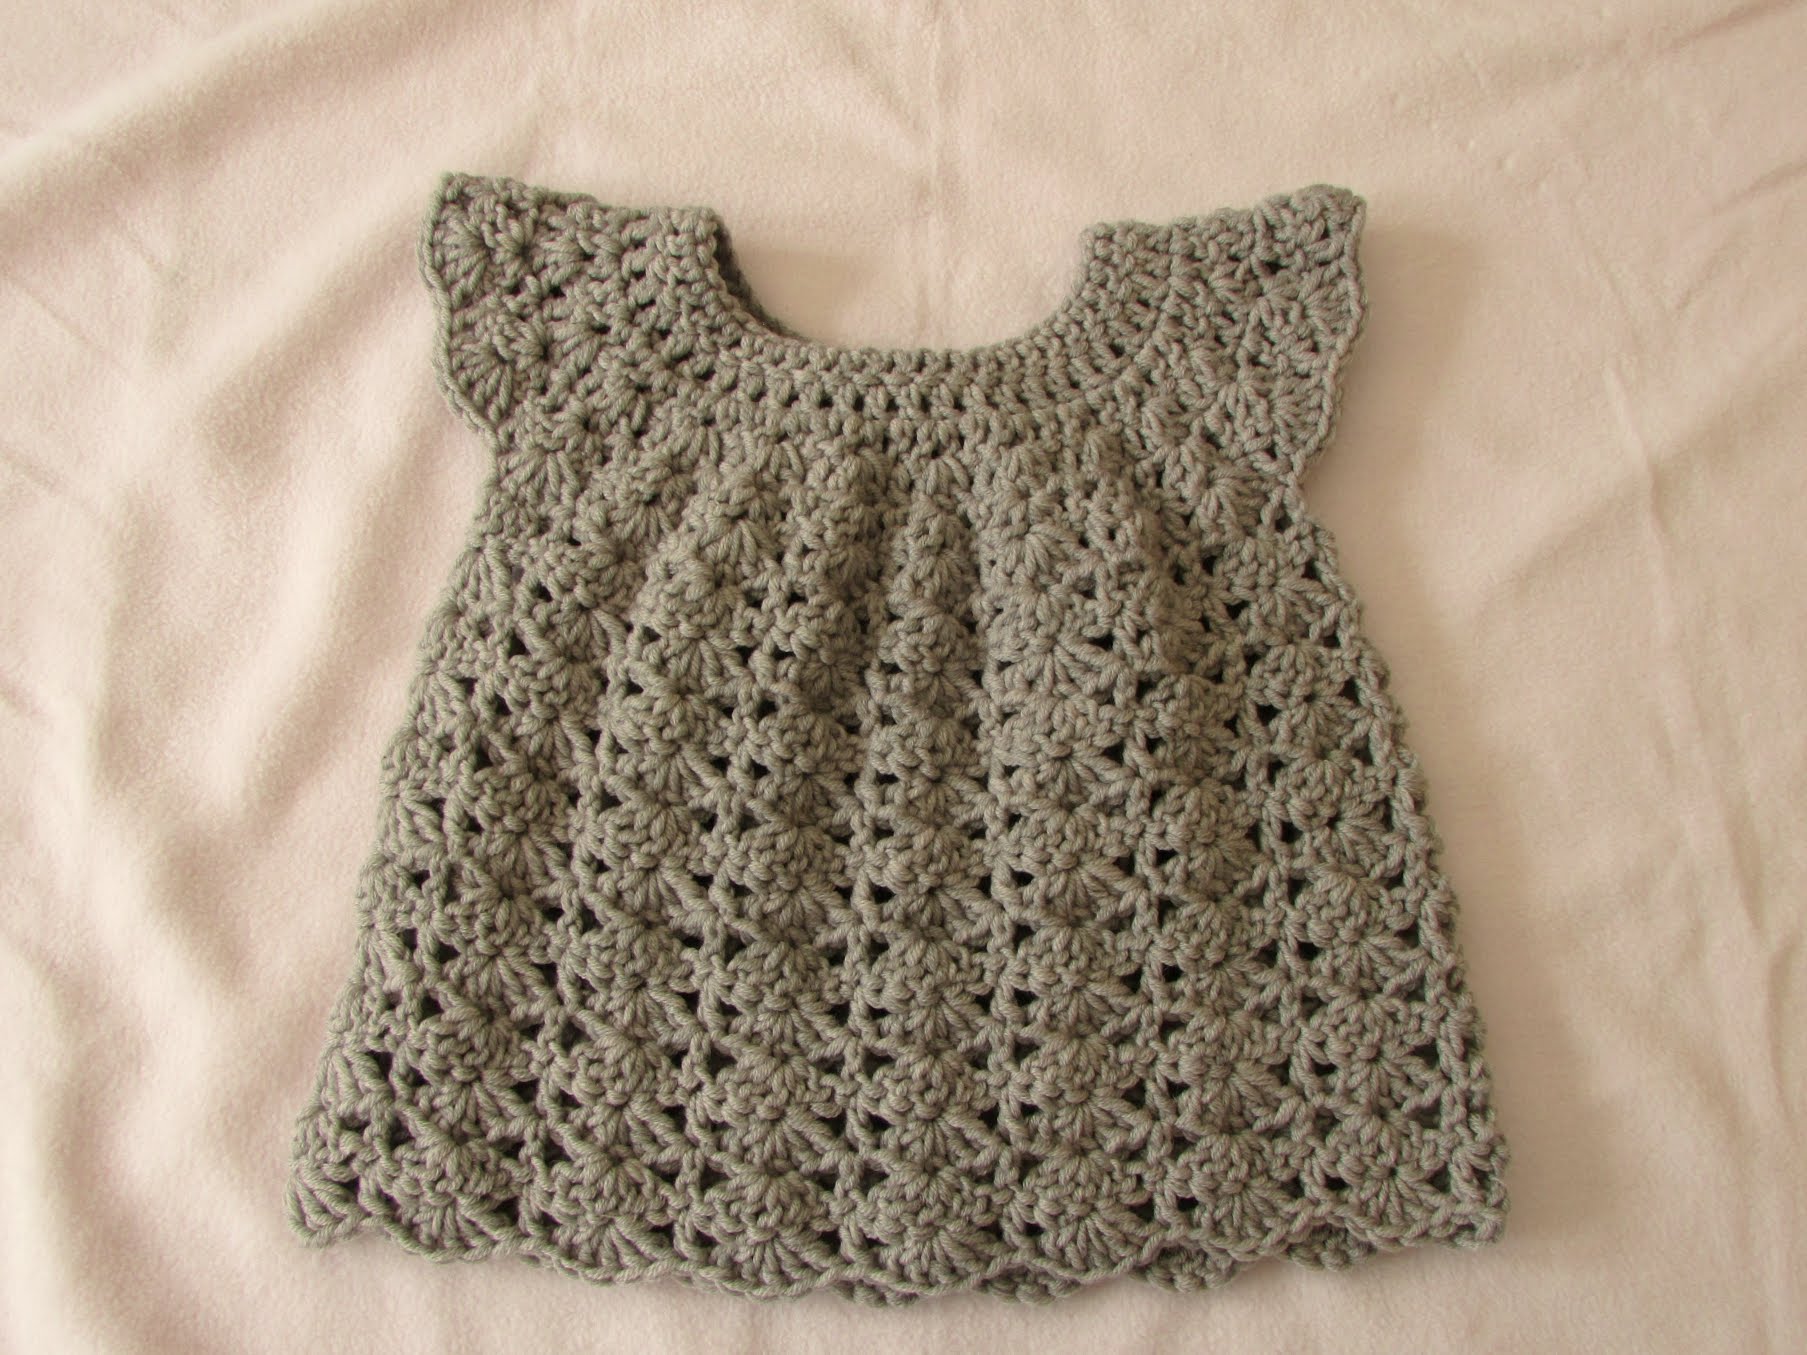 How to crochet an easy shell stitch baby / girl's dress for beginners